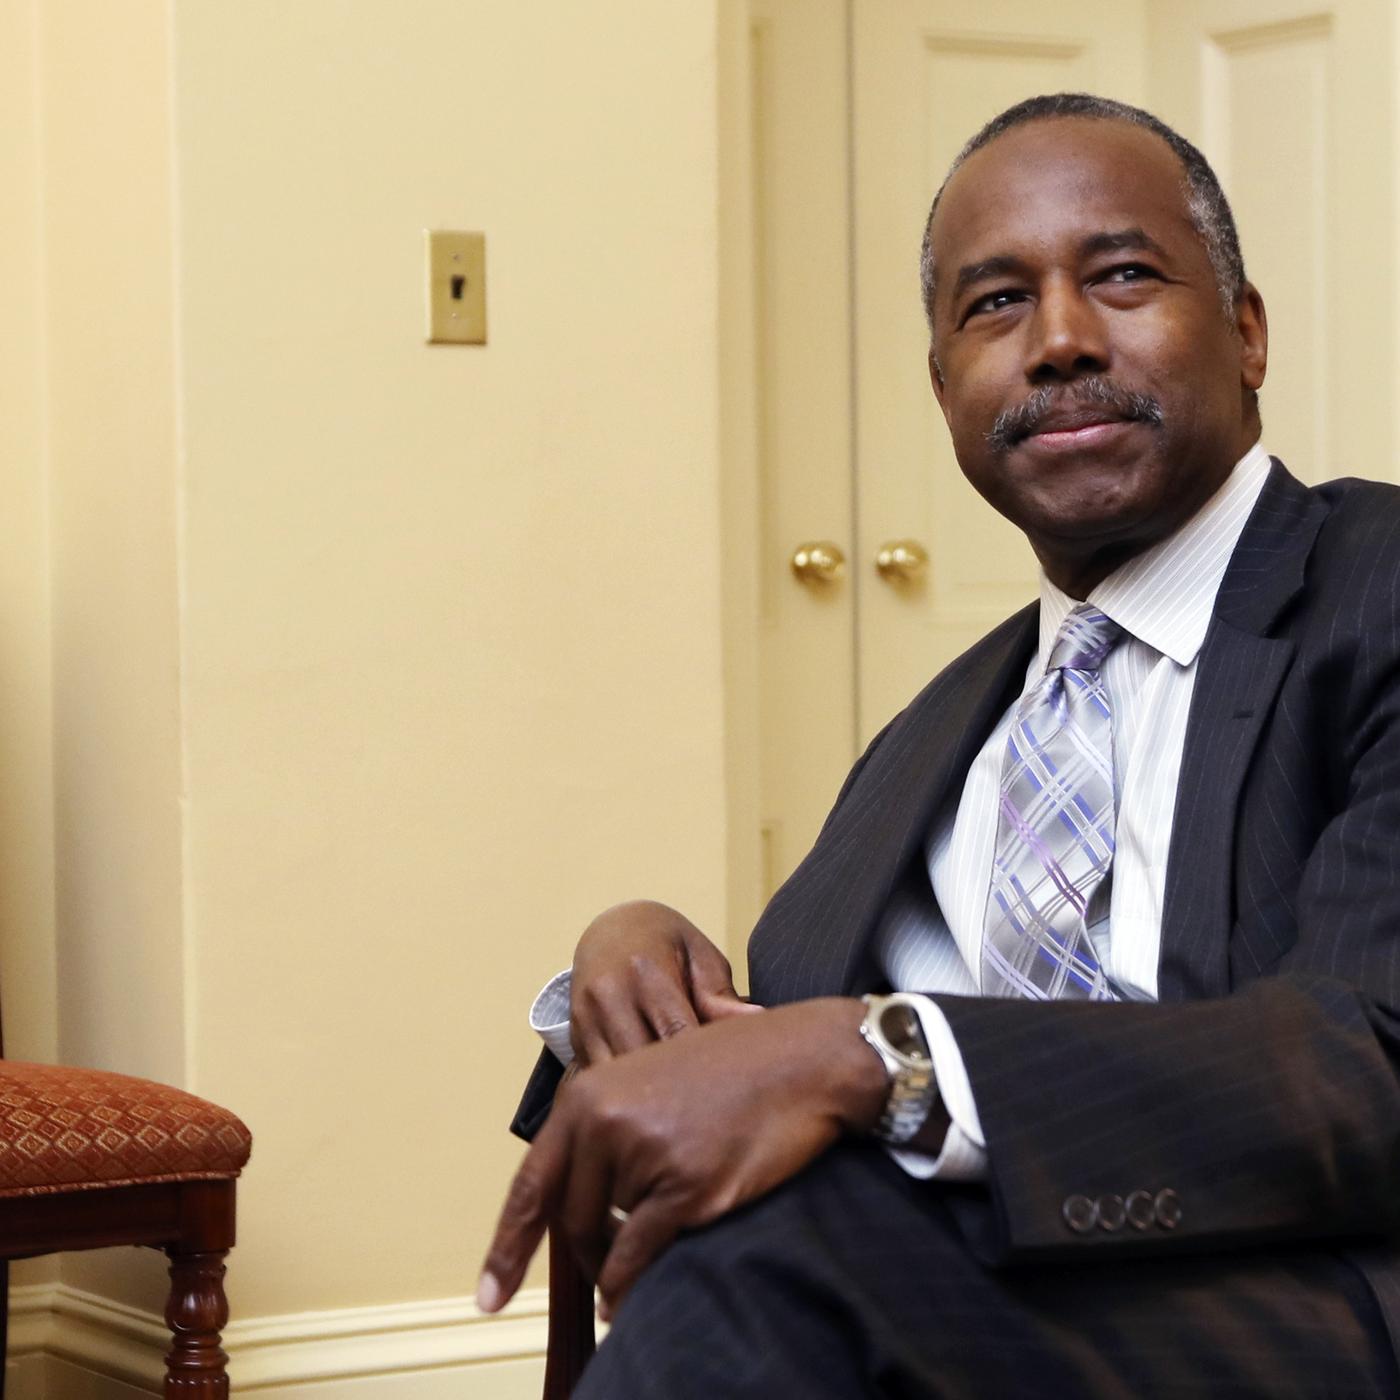 HUD Secretary to Public Housing Residents: Why Don't You Fix It
Yourself?